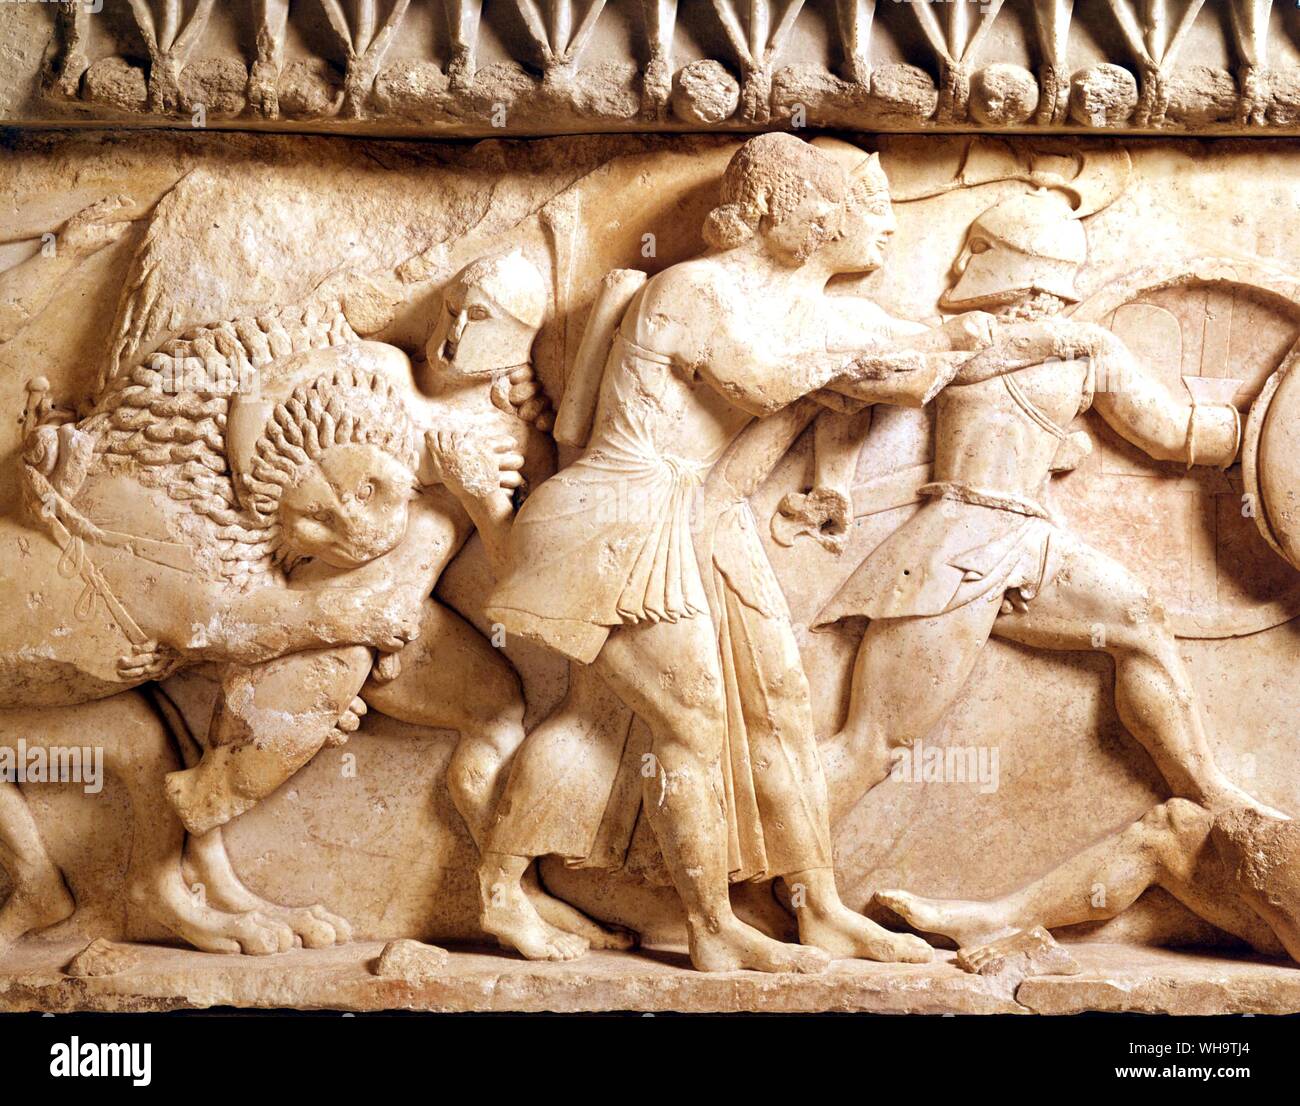 The gods are fighting the giants, awesomely anonymous in their helmets. Apollo and Artemis shoot arrows and the defet of the giants has begun - though armed and unhurt, one on the right is fleeing Stock Photo